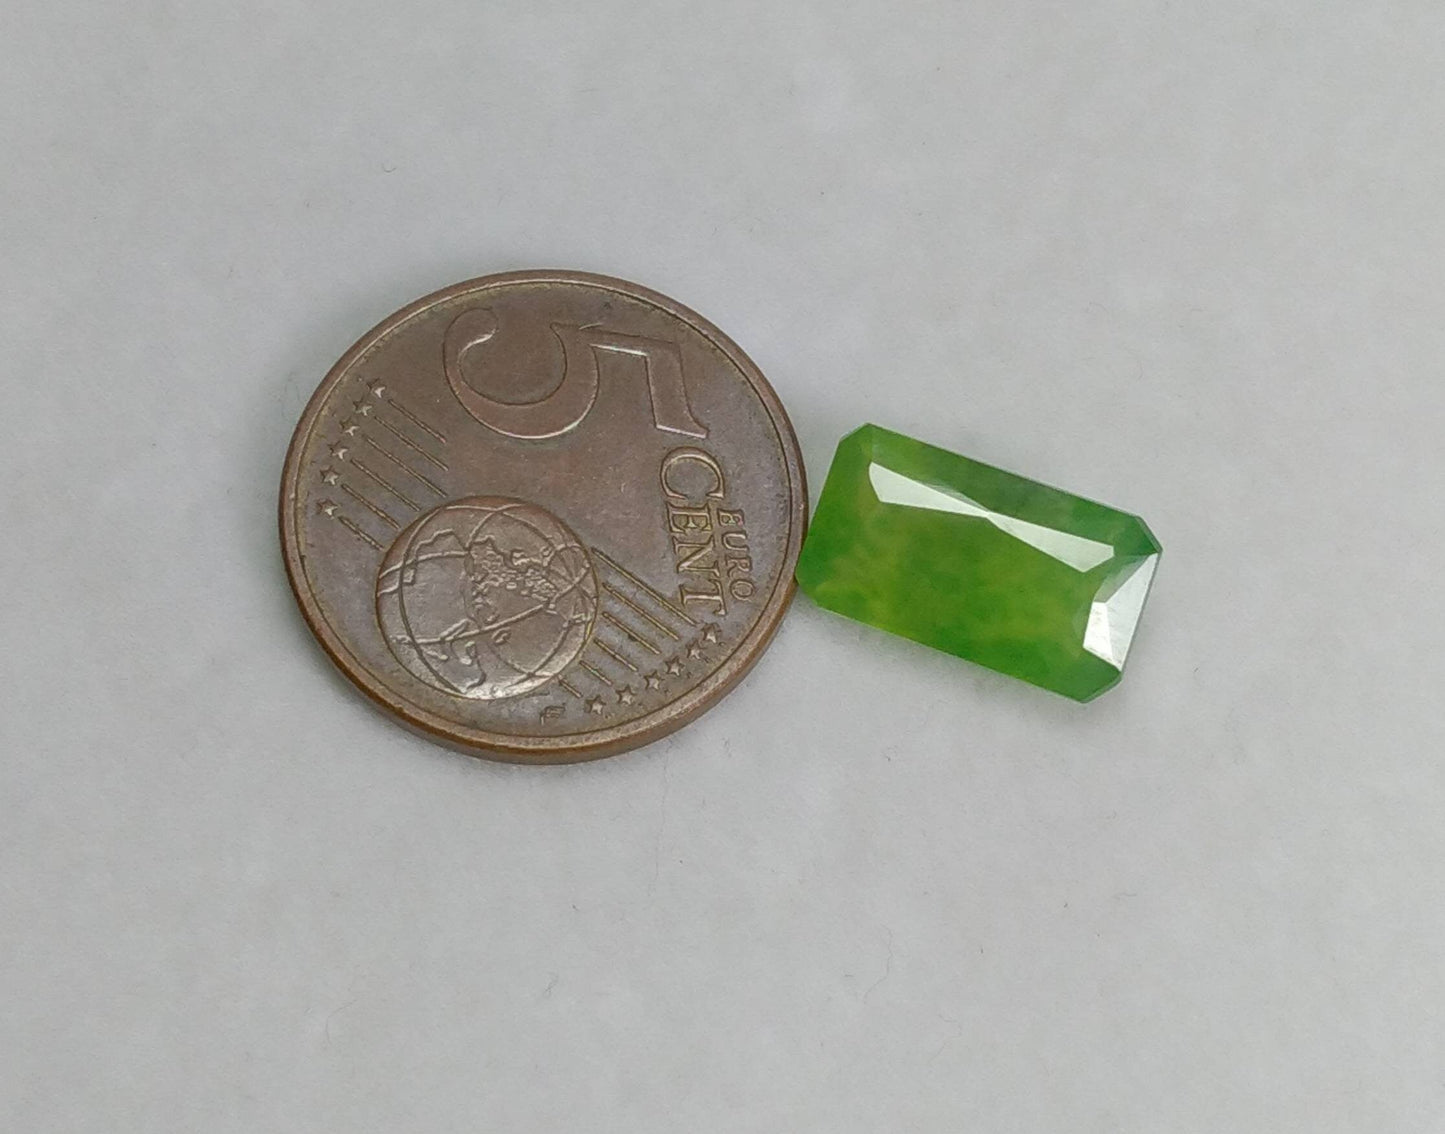 ARSAA GEMS AND MINERALSNatural fine quality beautiful 5 carats green radiant cut shape Faceted hydrograssular garnet gem - Premium  from ARSAA GEMS AND MINERALS - Just $15.00! Shop now at ARSAA GEMS AND MINERALS